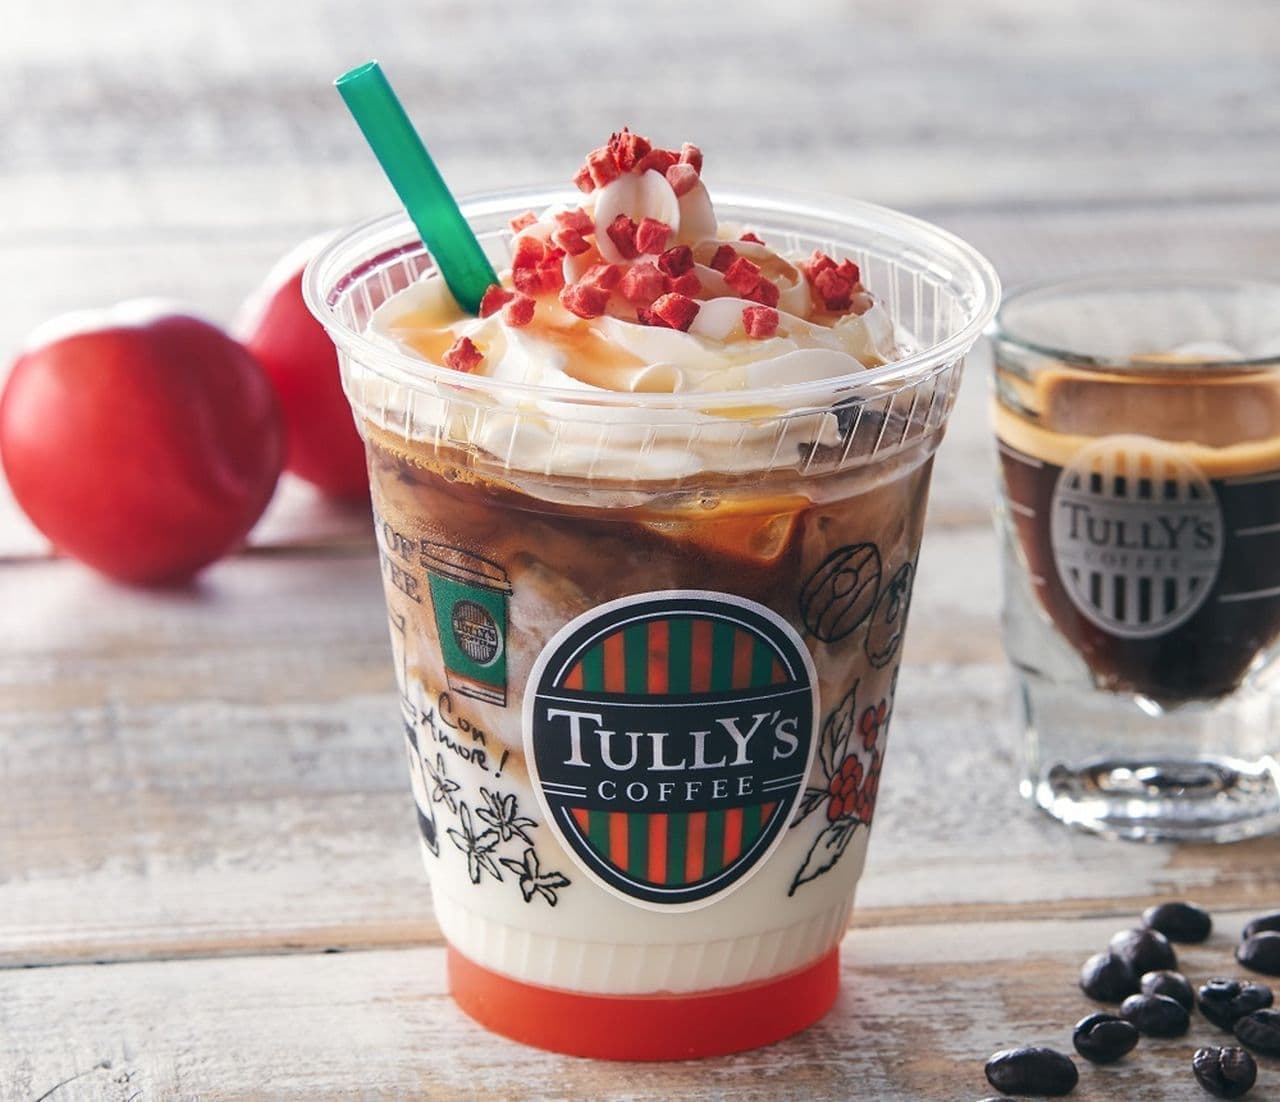 Tully's "Iced Sumo Cortard